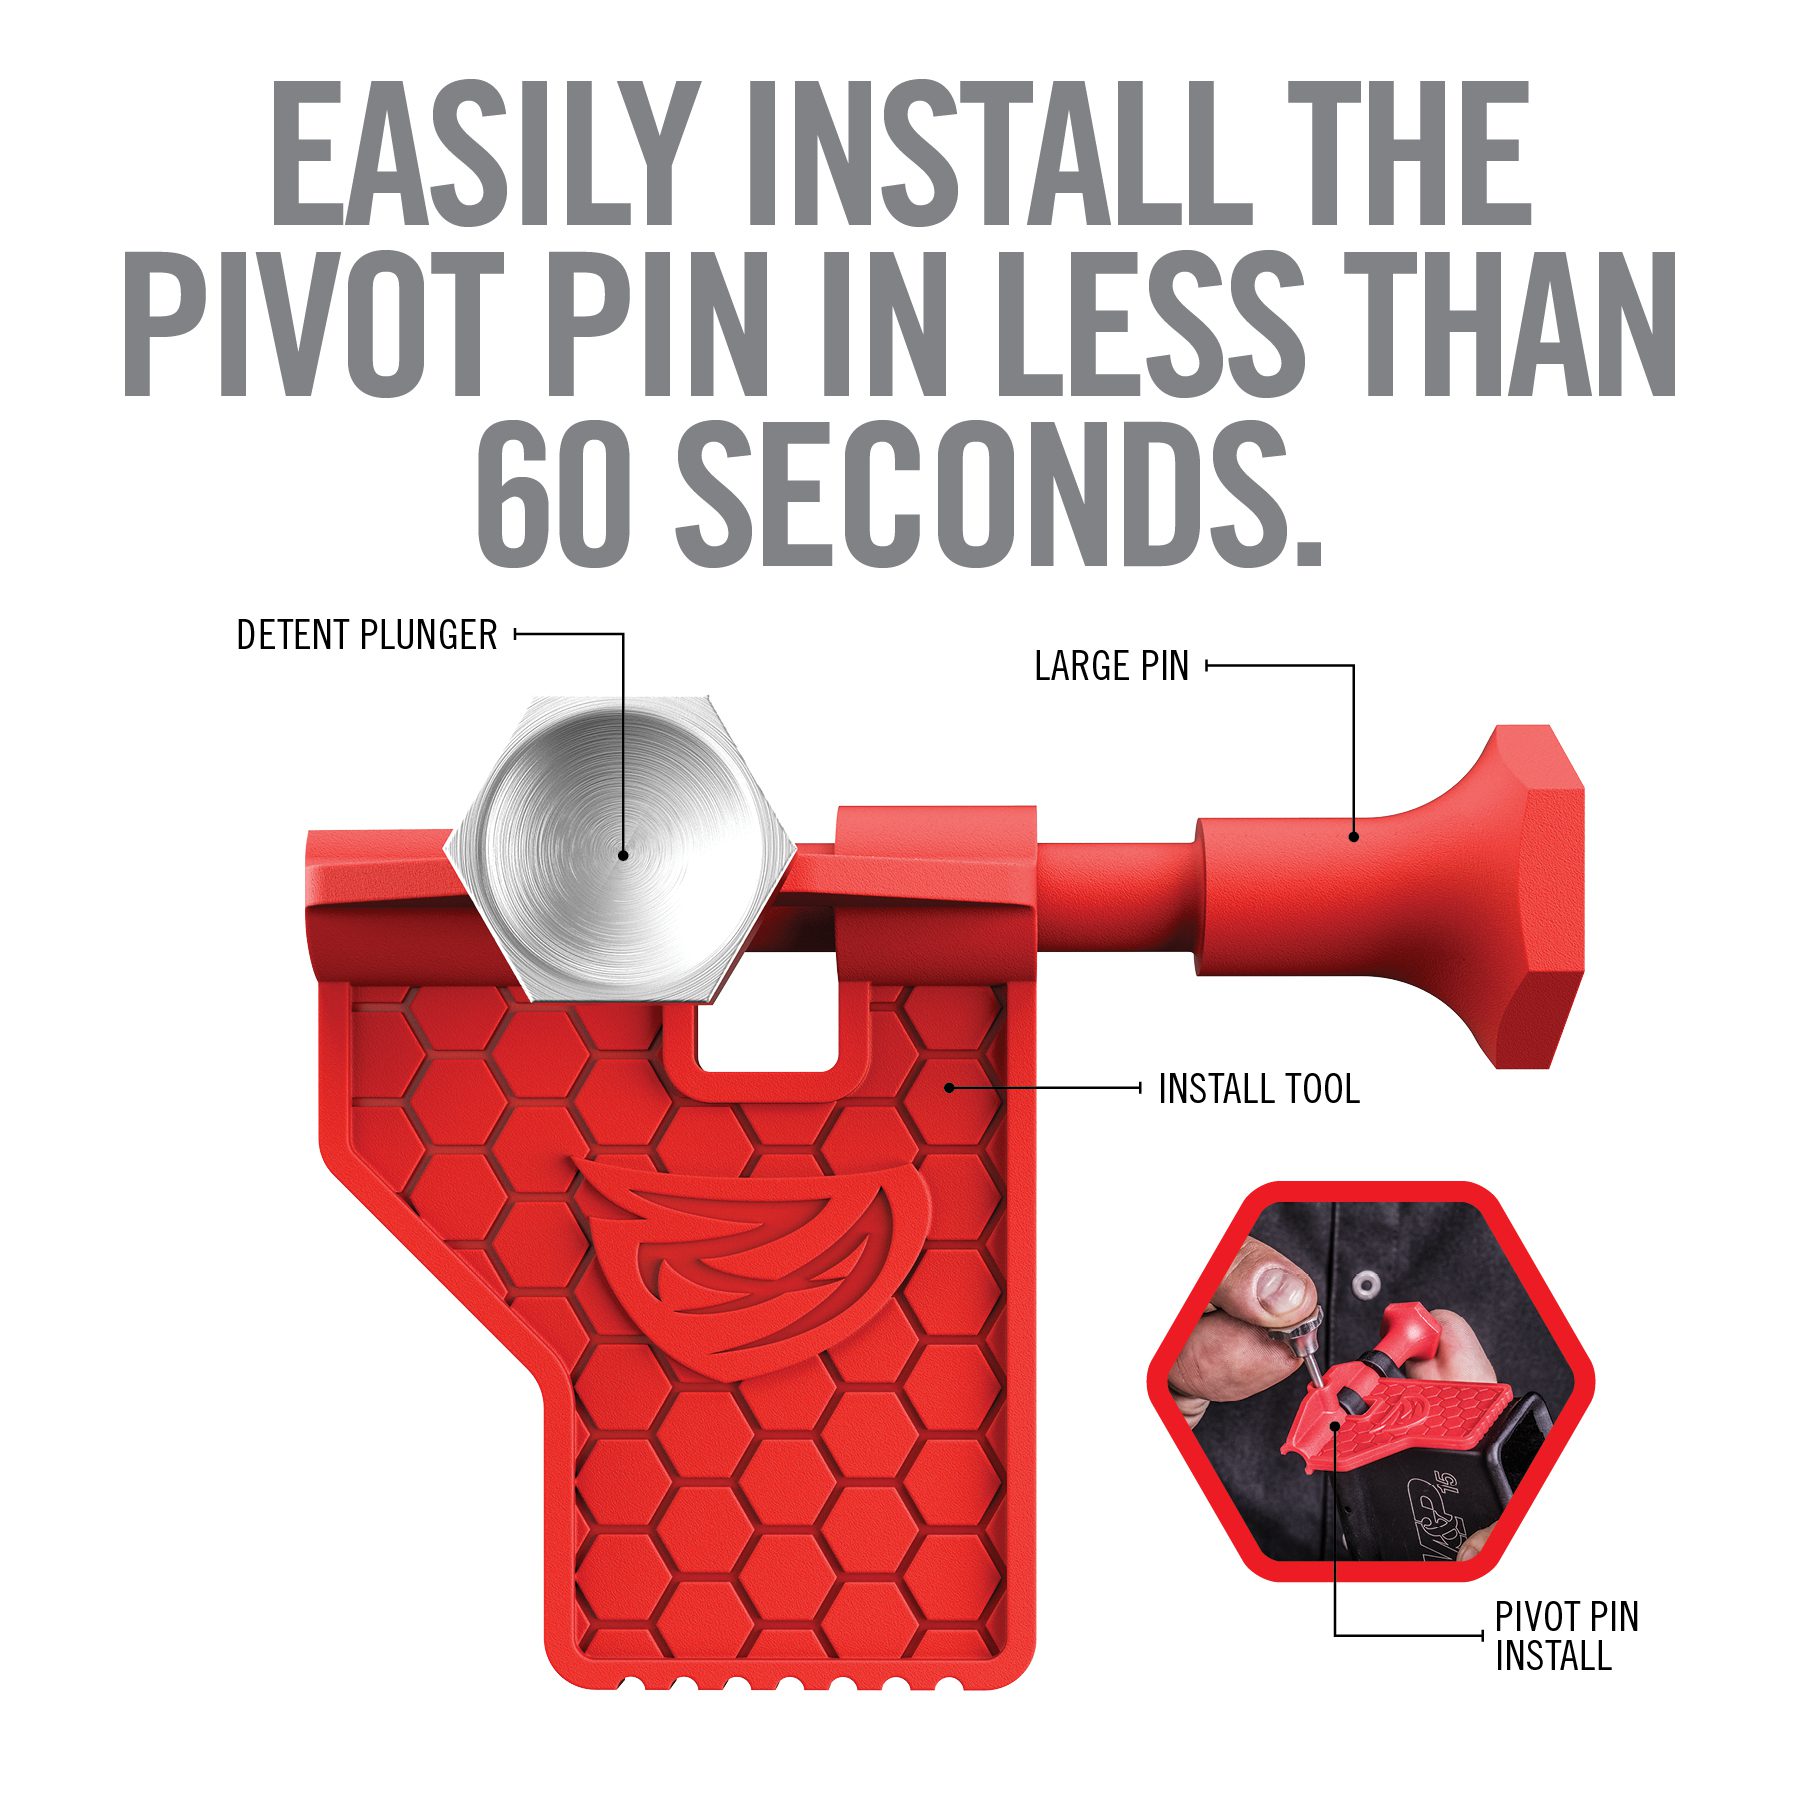 an advertisement with instructions on how to use the pivot pin in less than 60 seconds